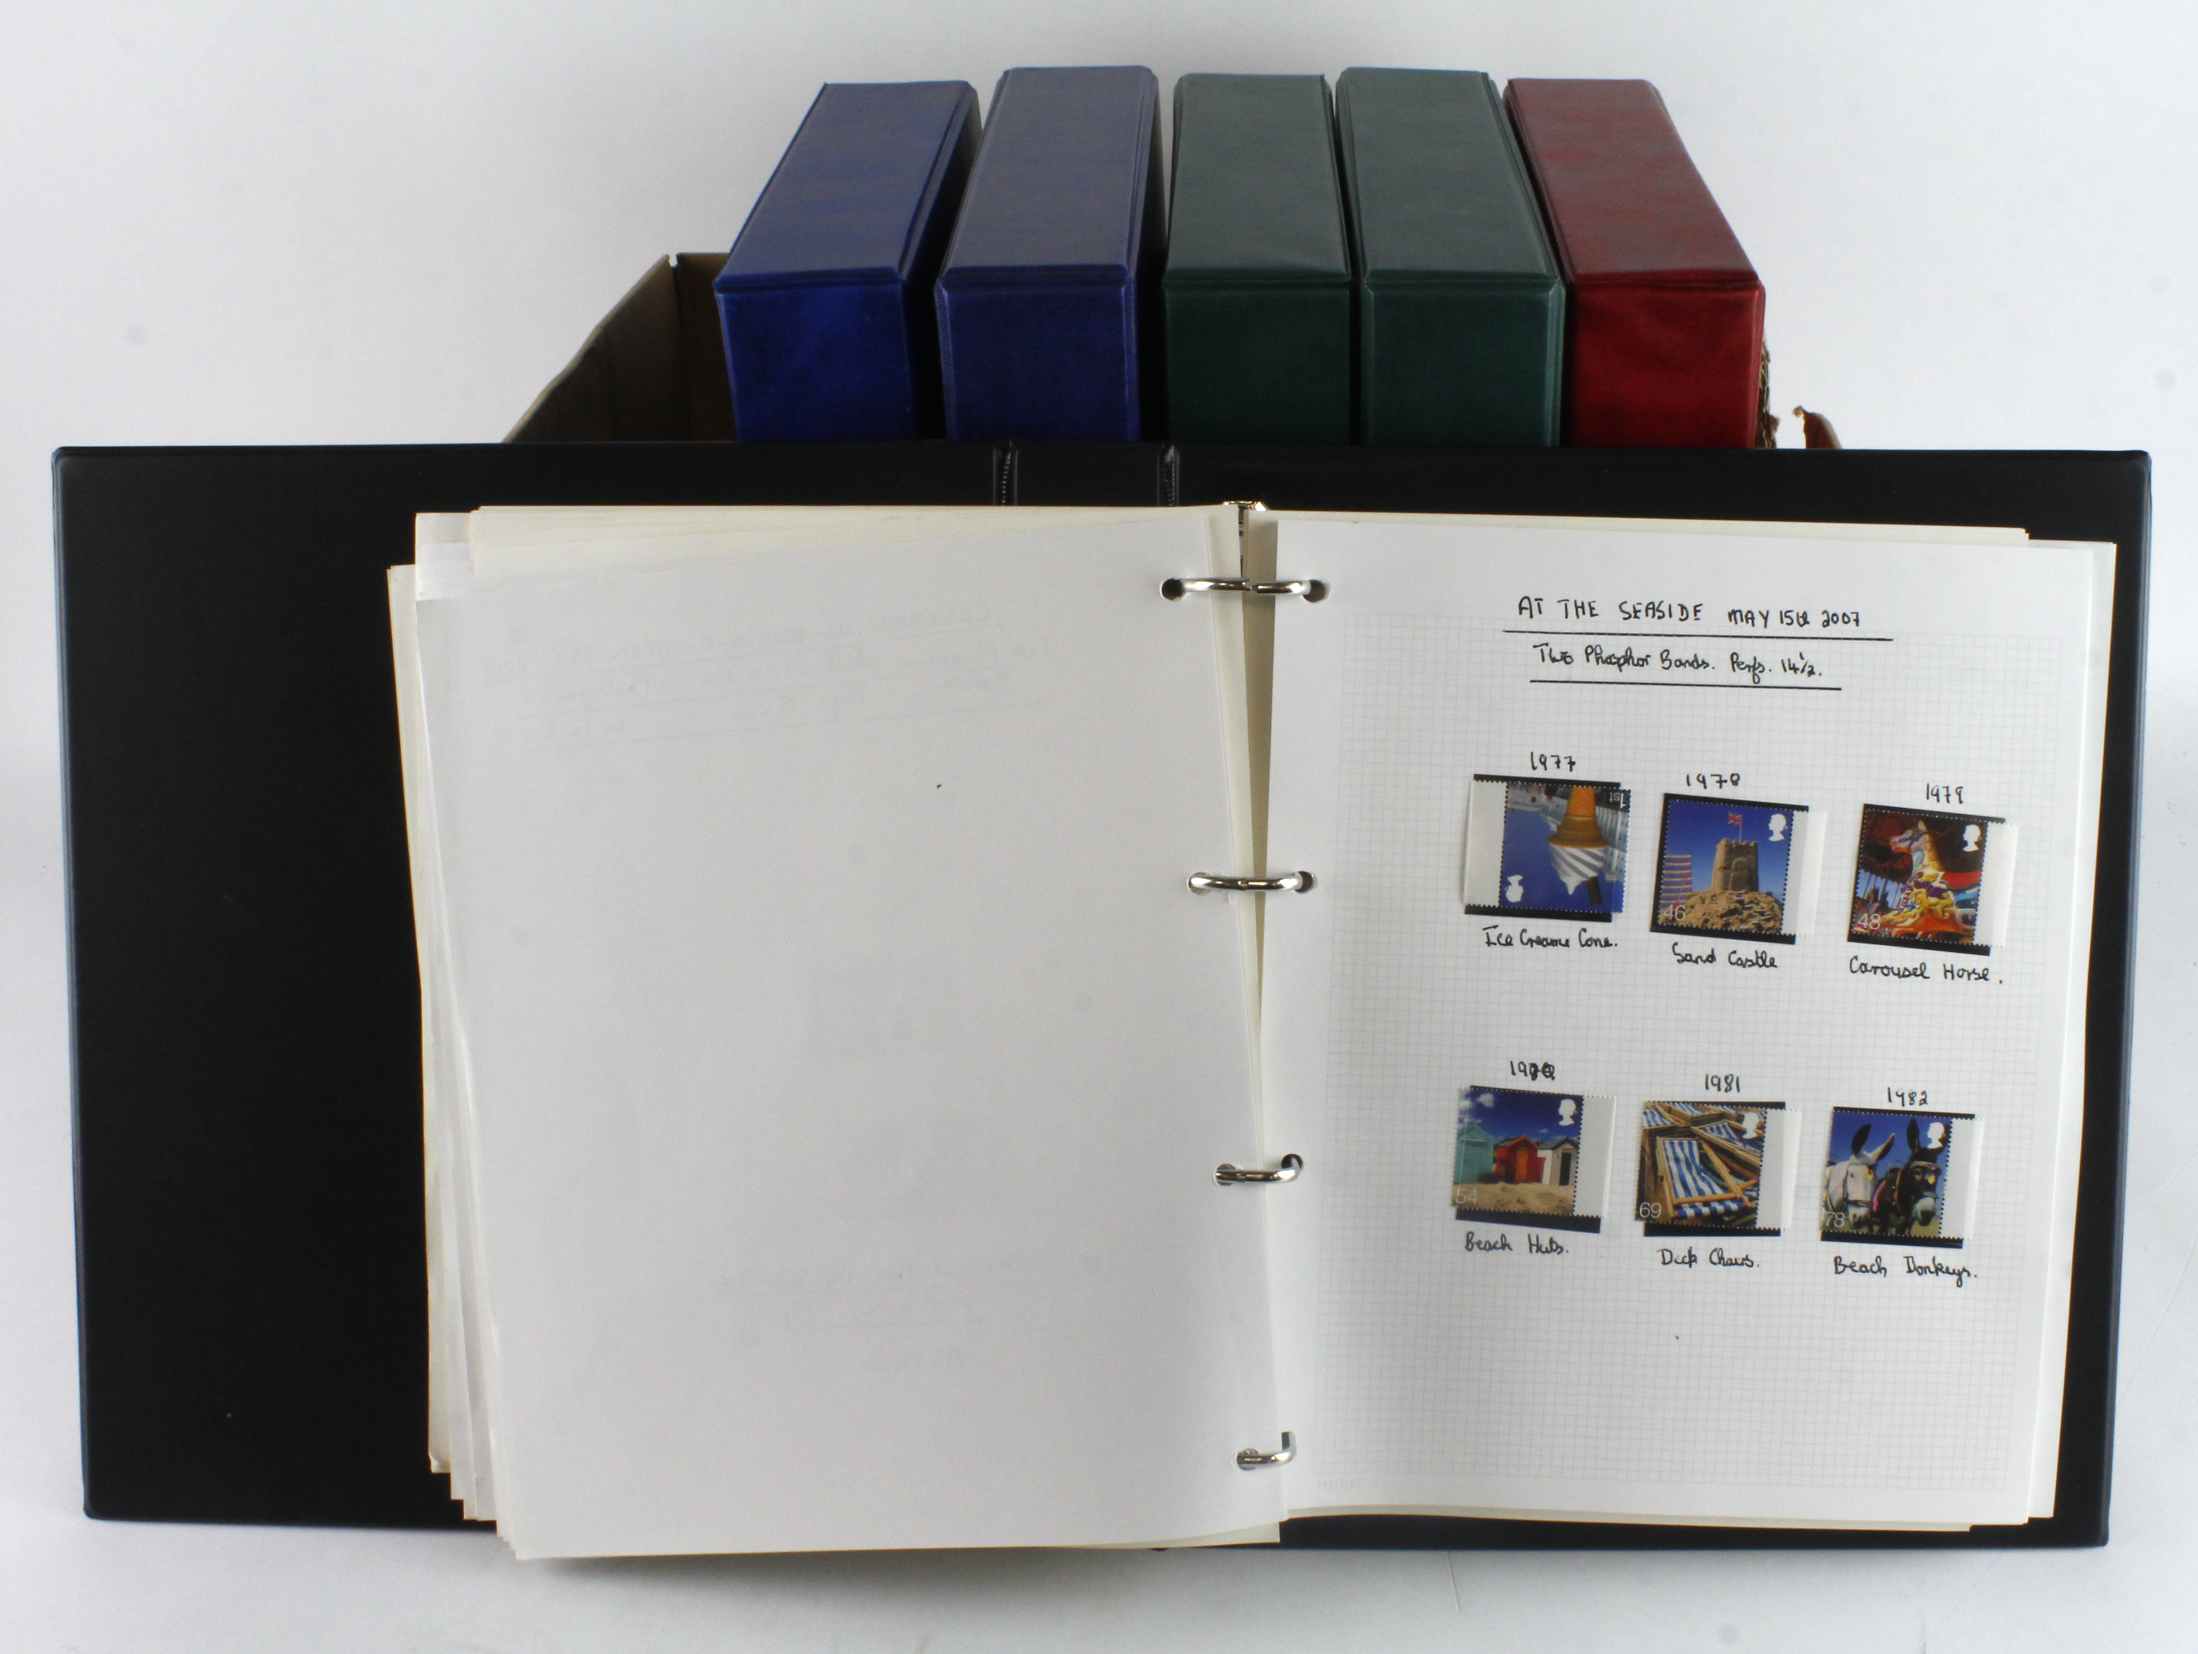 GB - QE2 specialised issues in 6x similar ring binders 1971 to 2016. All used 1971 to 1994, with